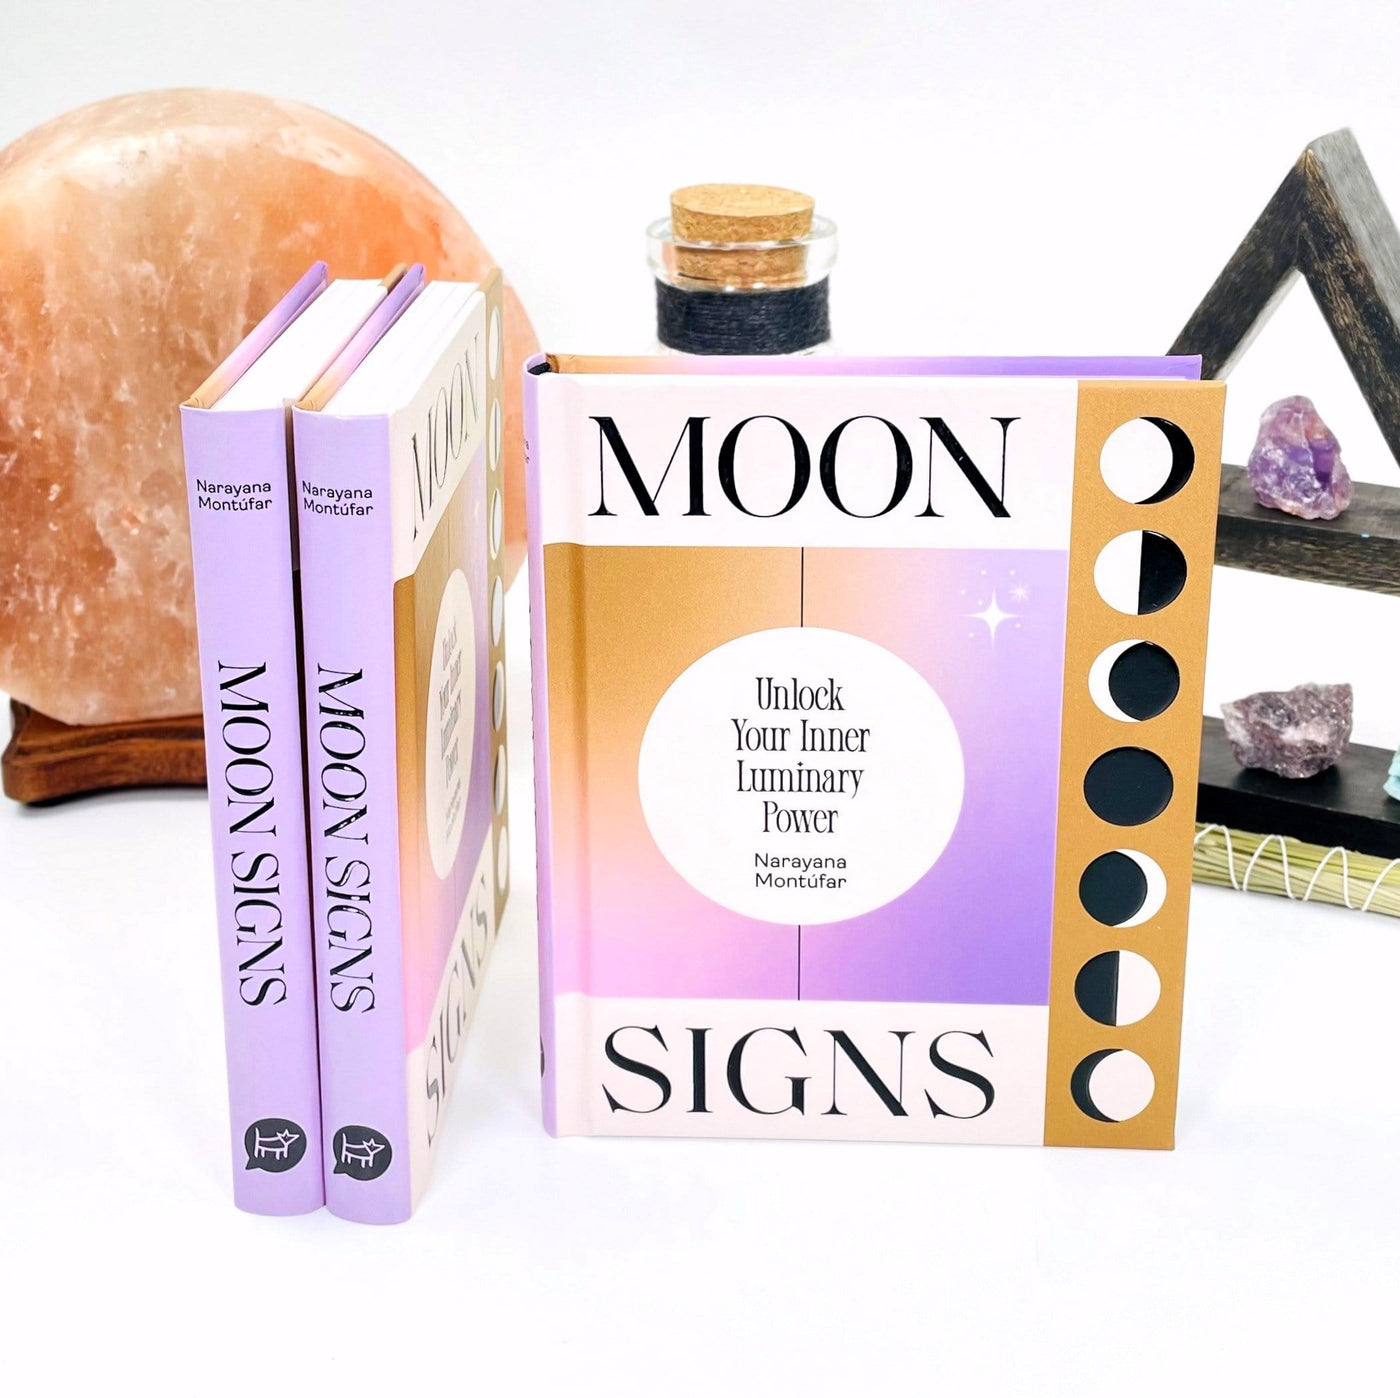 Moon Signs book on a table